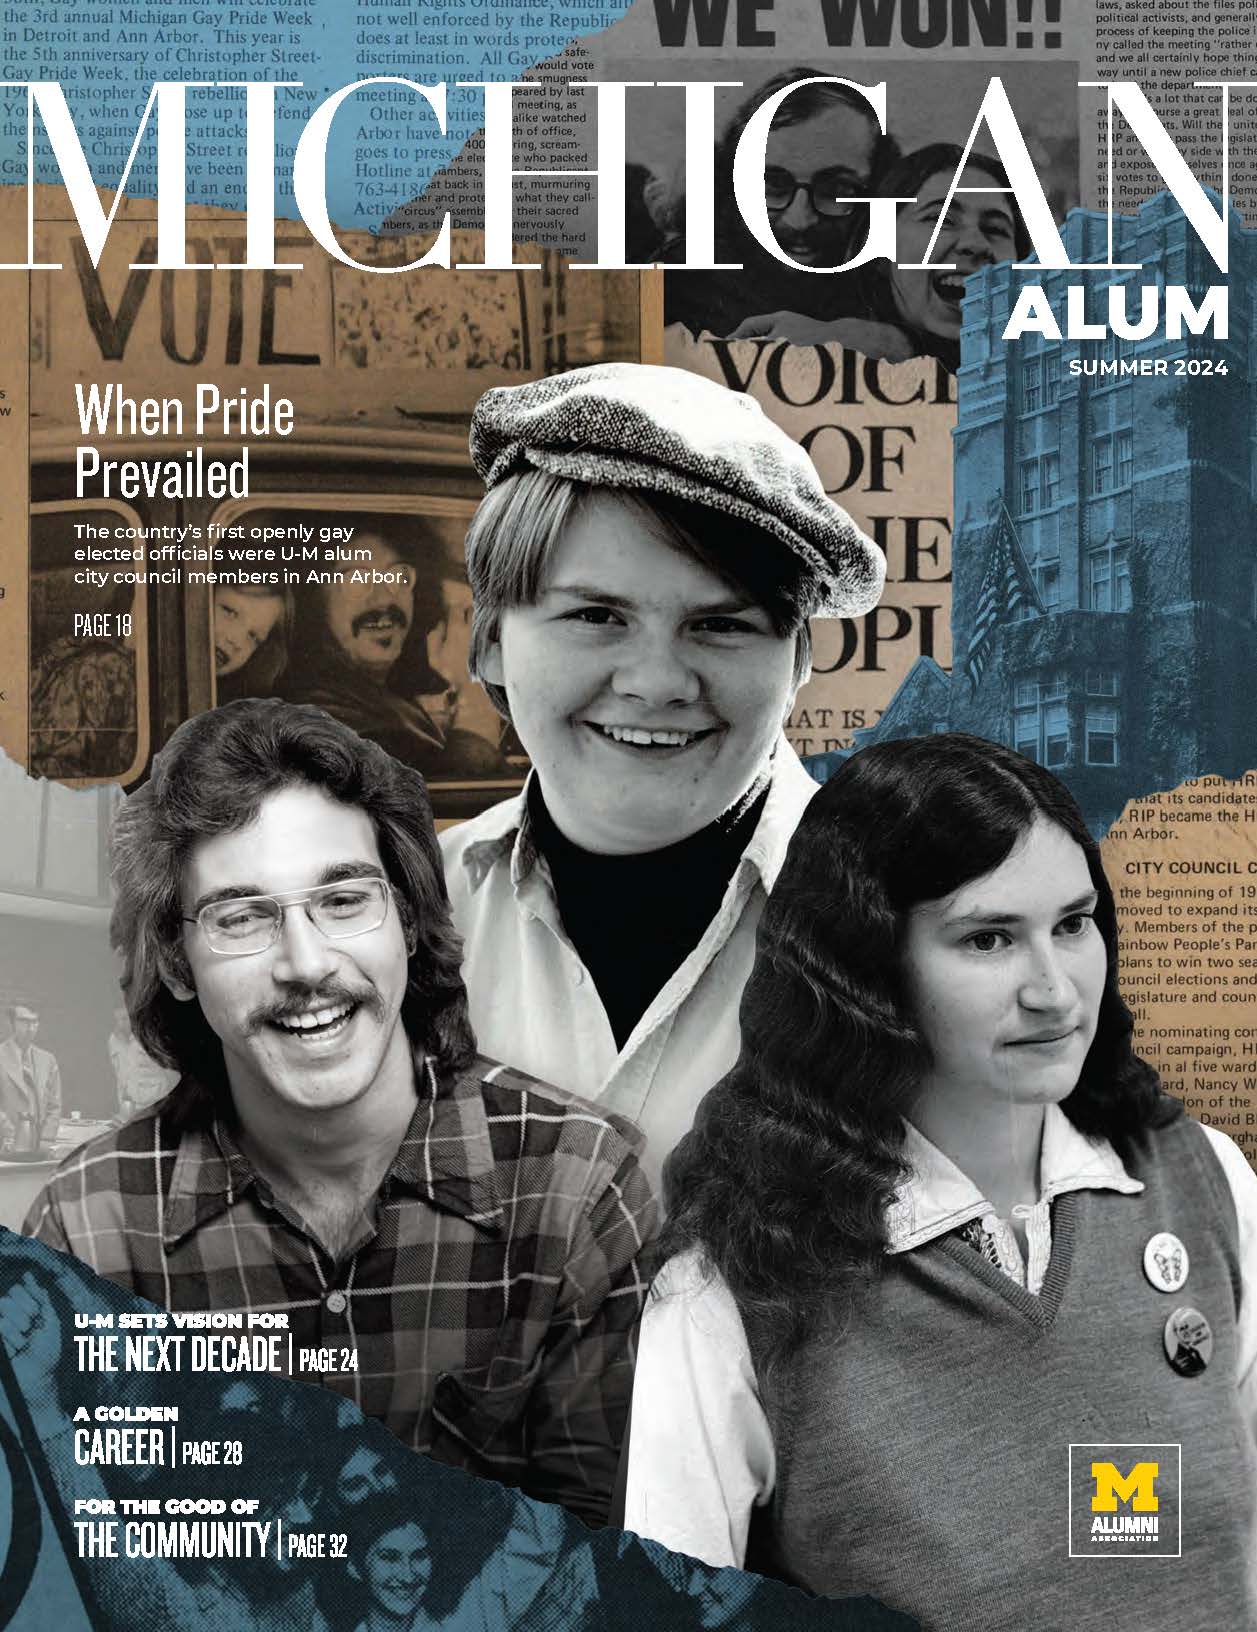 Cover of the Summer 2024 issue of Michigan Alum magazine